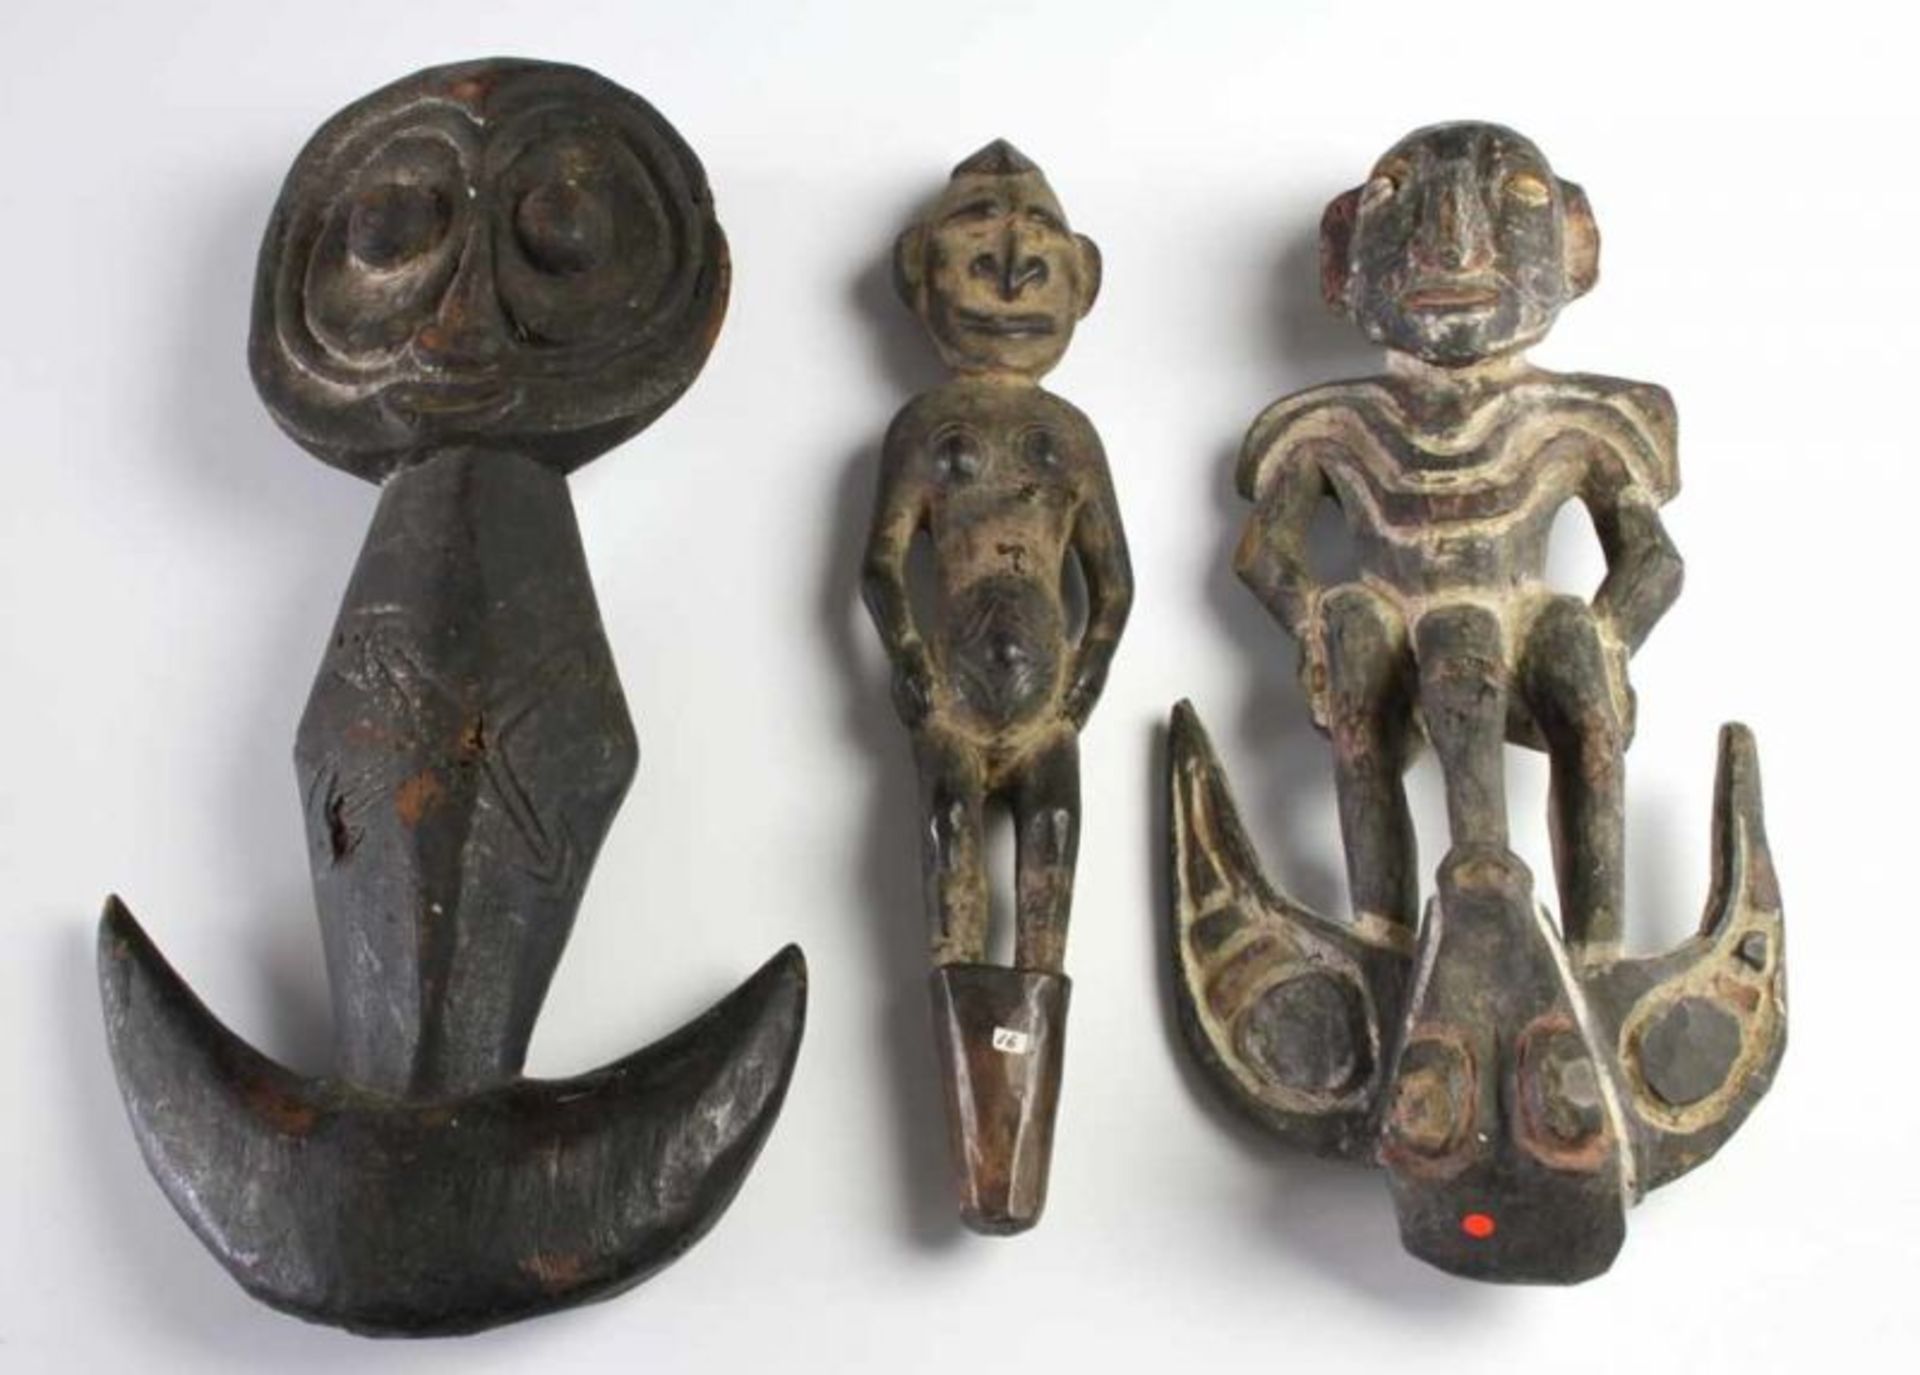 PNG, Sepik, wooden hook figure,with carved concave face, four arrows on rhombic shaped body. With